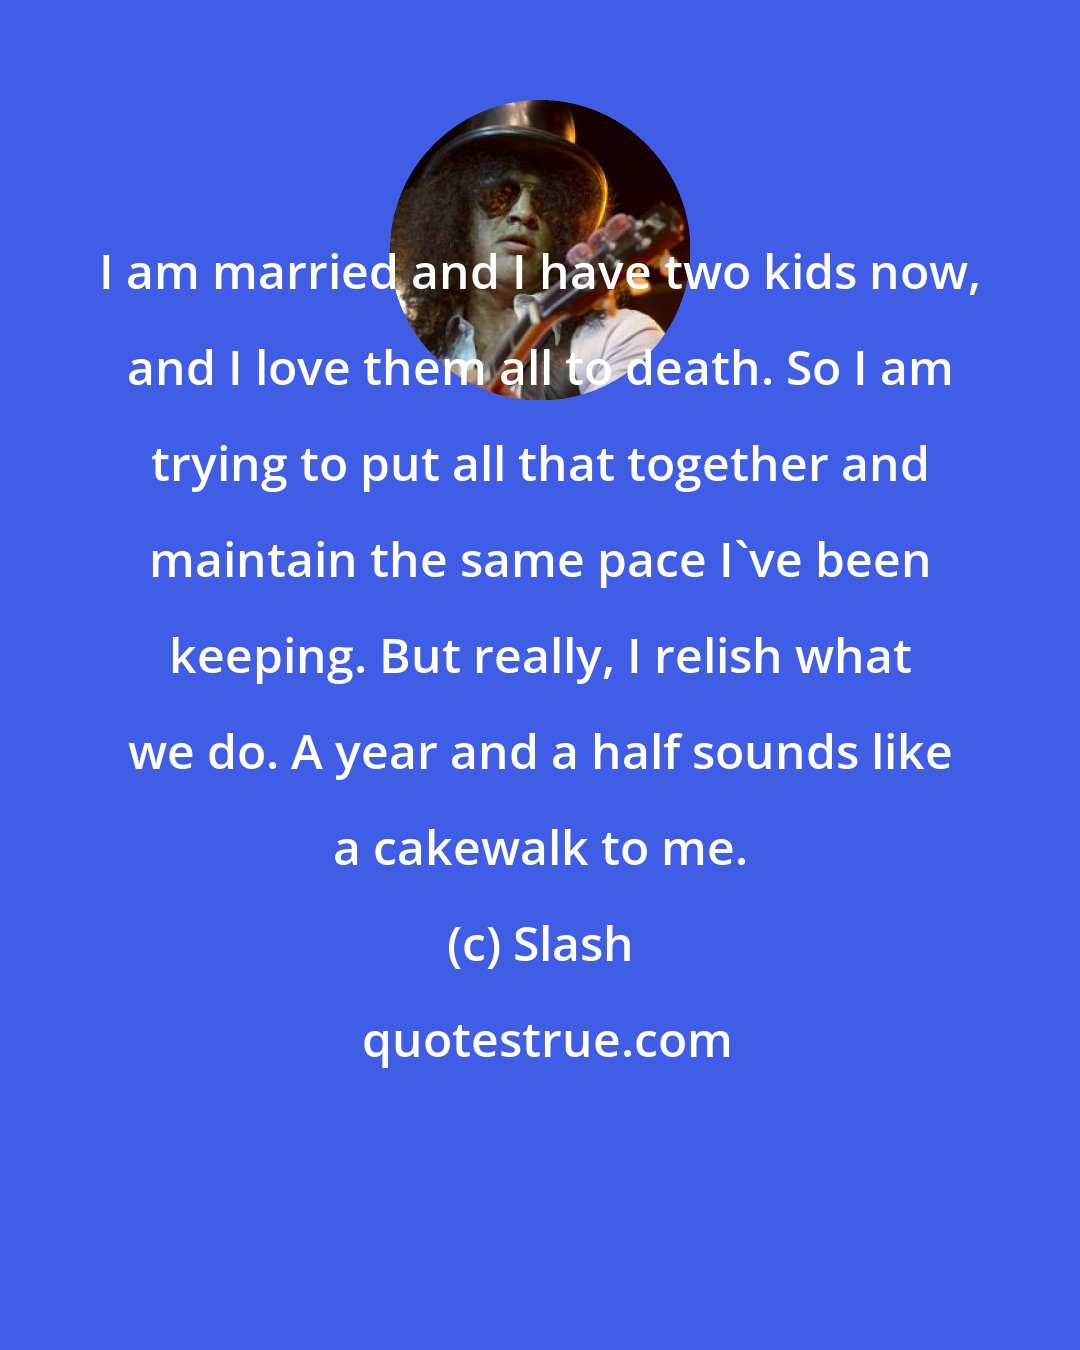 Slash: I am married and I have two kids now, and I love them all to death. So I am trying to put all that together and maintain the same pace I've been keeping. But really, I relish what we do. A year and a half sounds like a cakewalk to me.